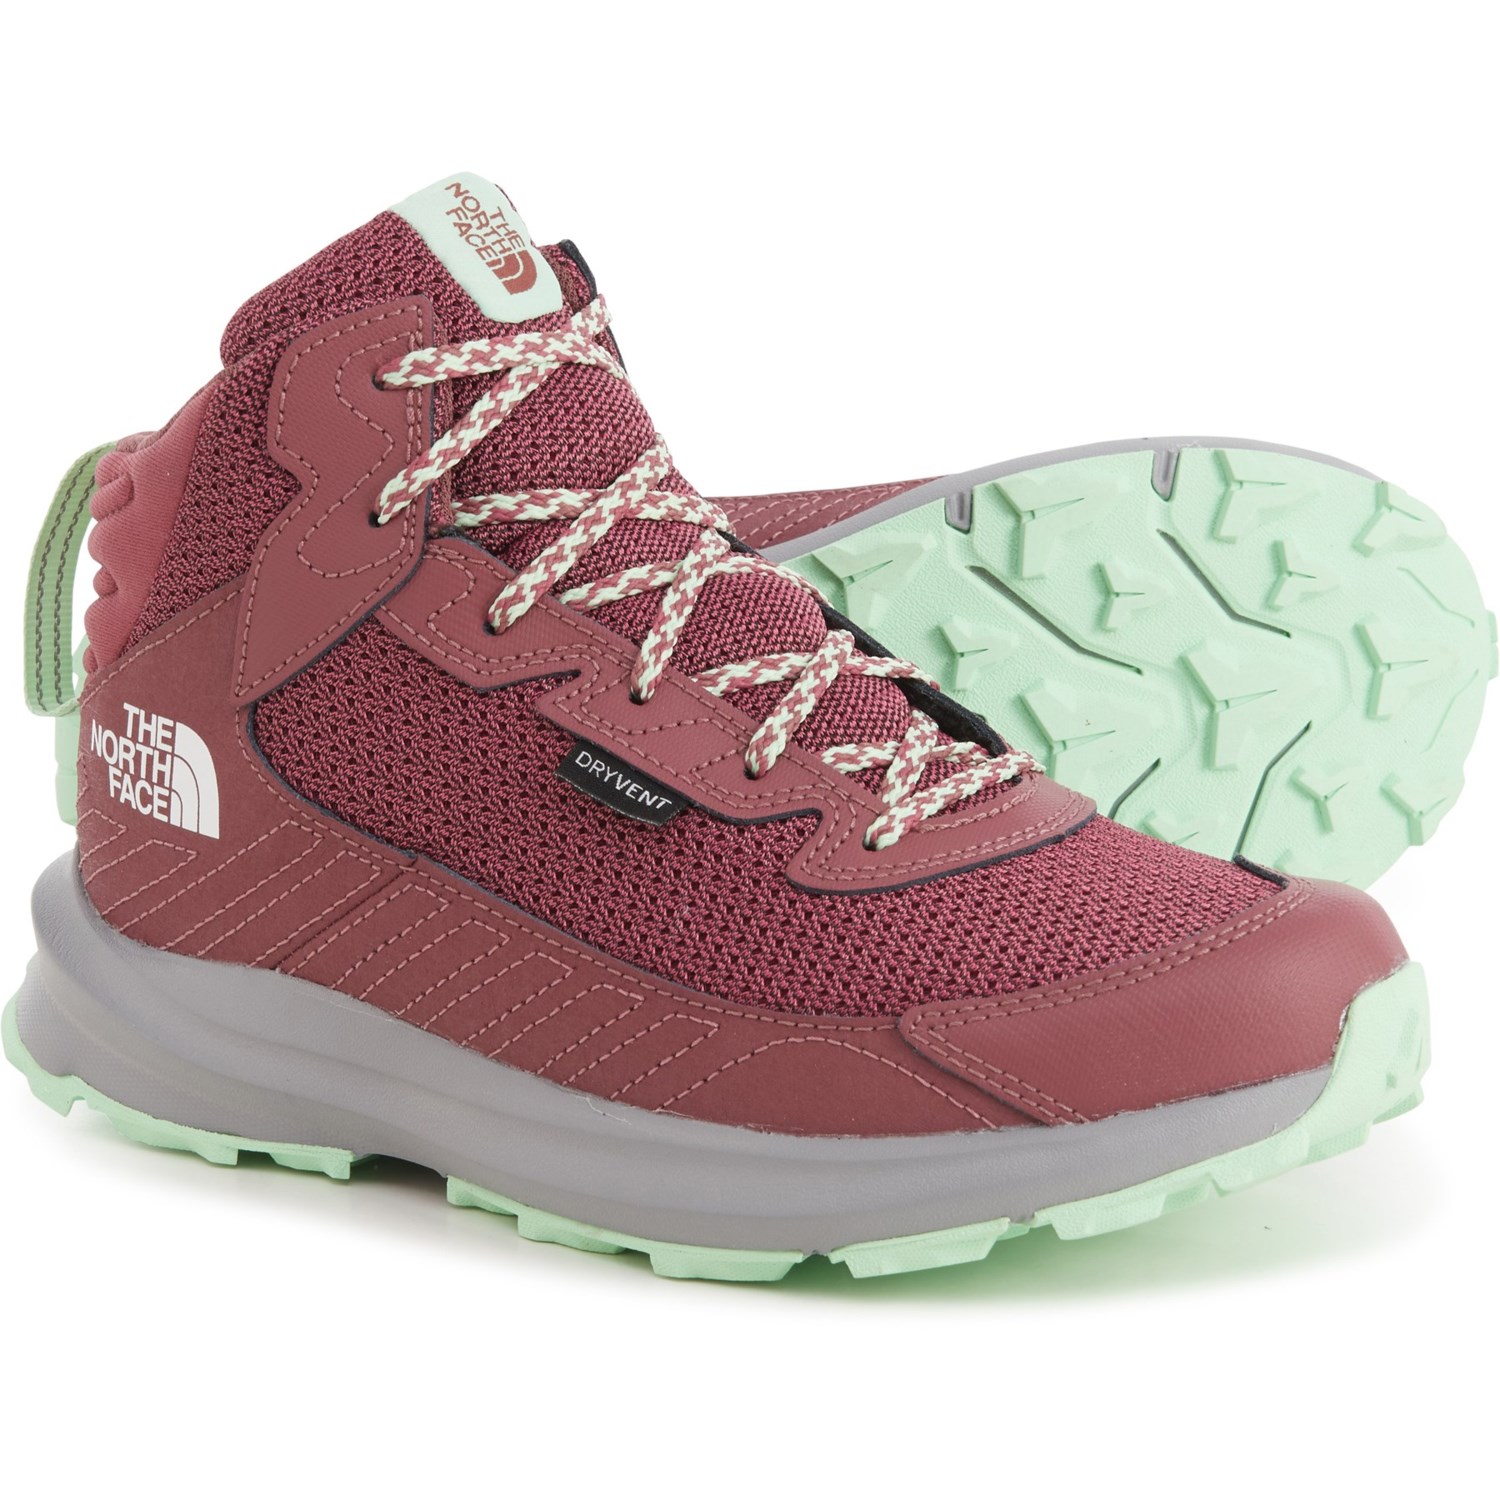 The North Face Boys and Girls Fastpack Mid Hiking Boots - Waterproof